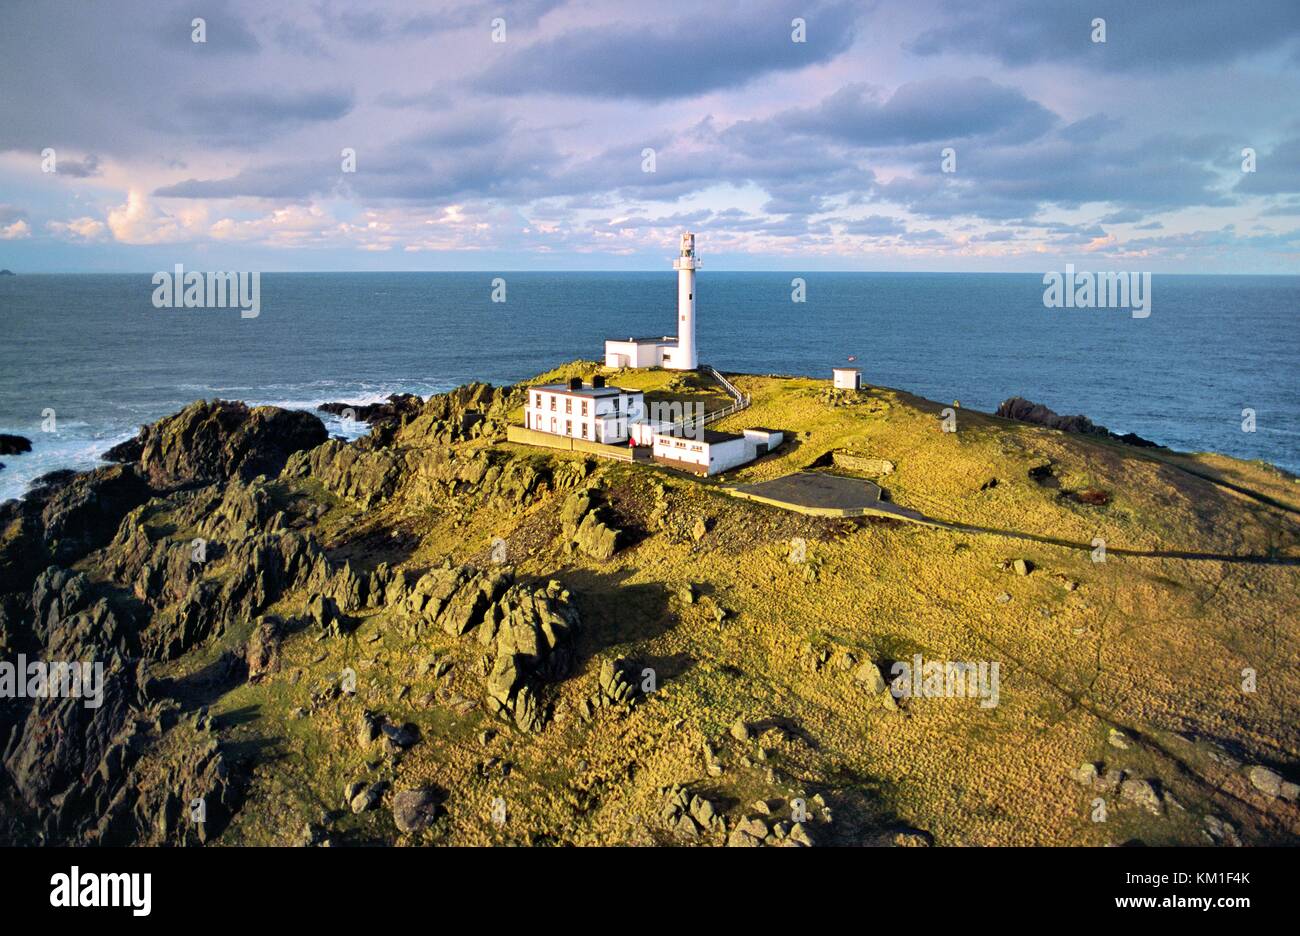 Aerial view of Inishtrahull lighthouse on Inishtrahull Island north of Malin Head, County Donegal, Ireland. Stock Photo